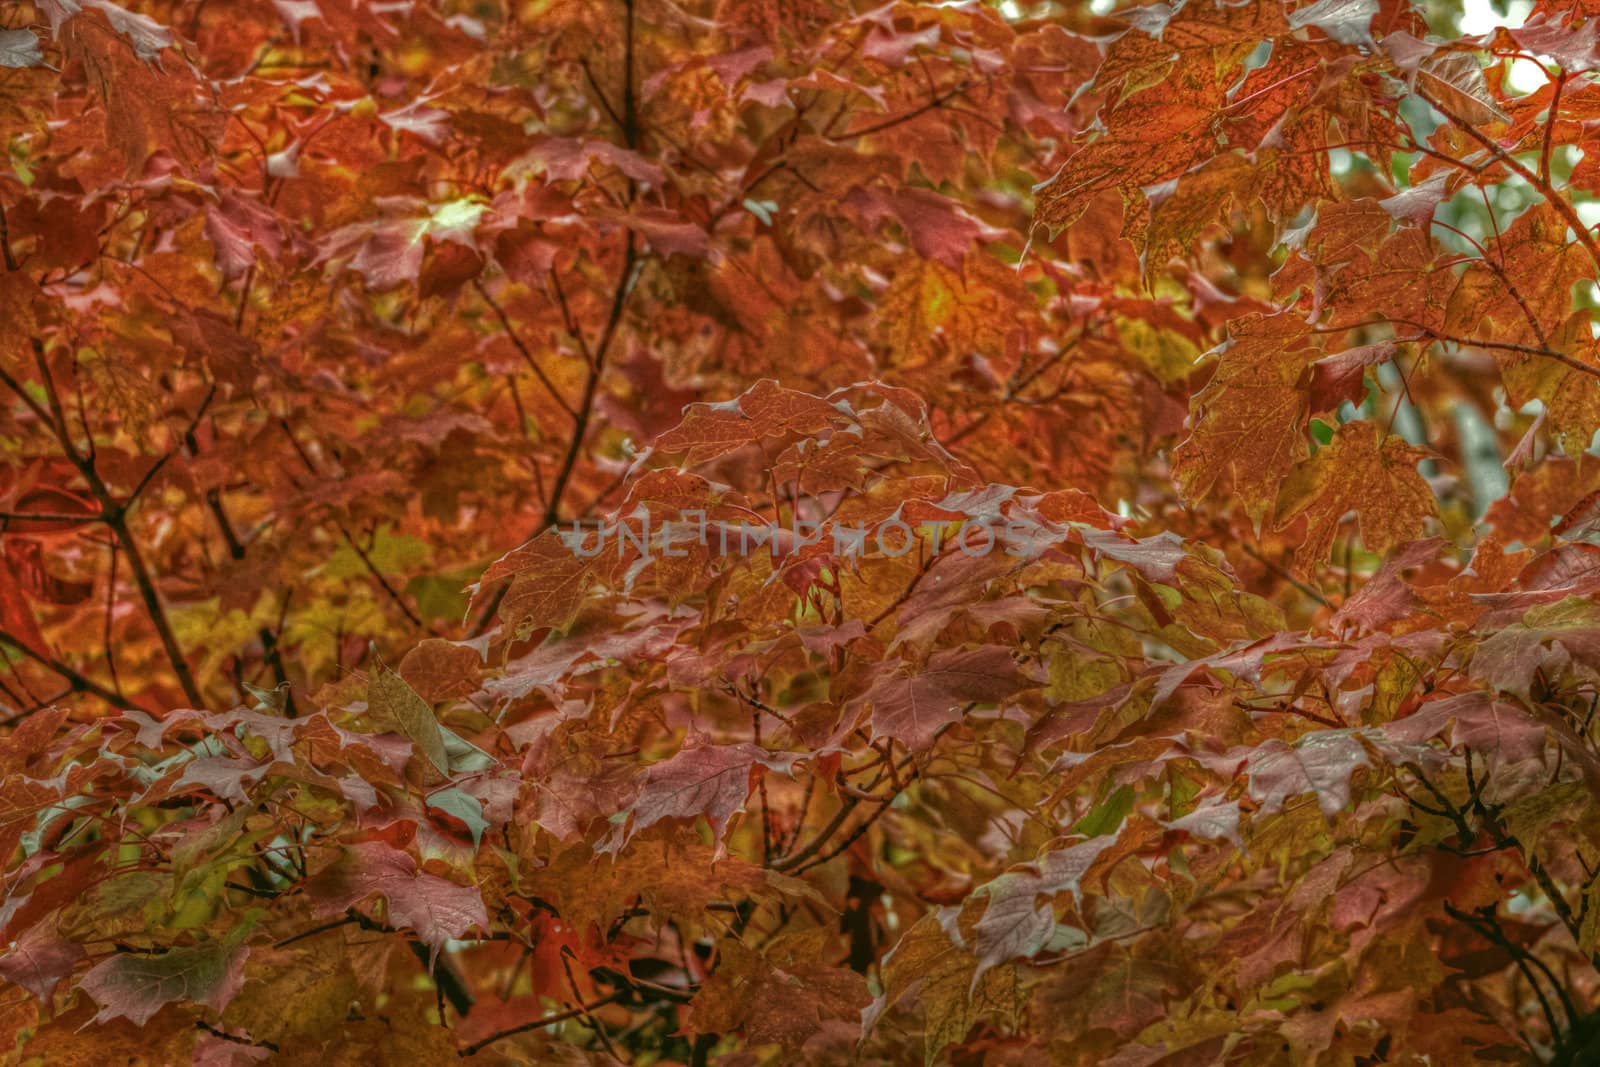 Colorful leaves of a maple tree in the fall